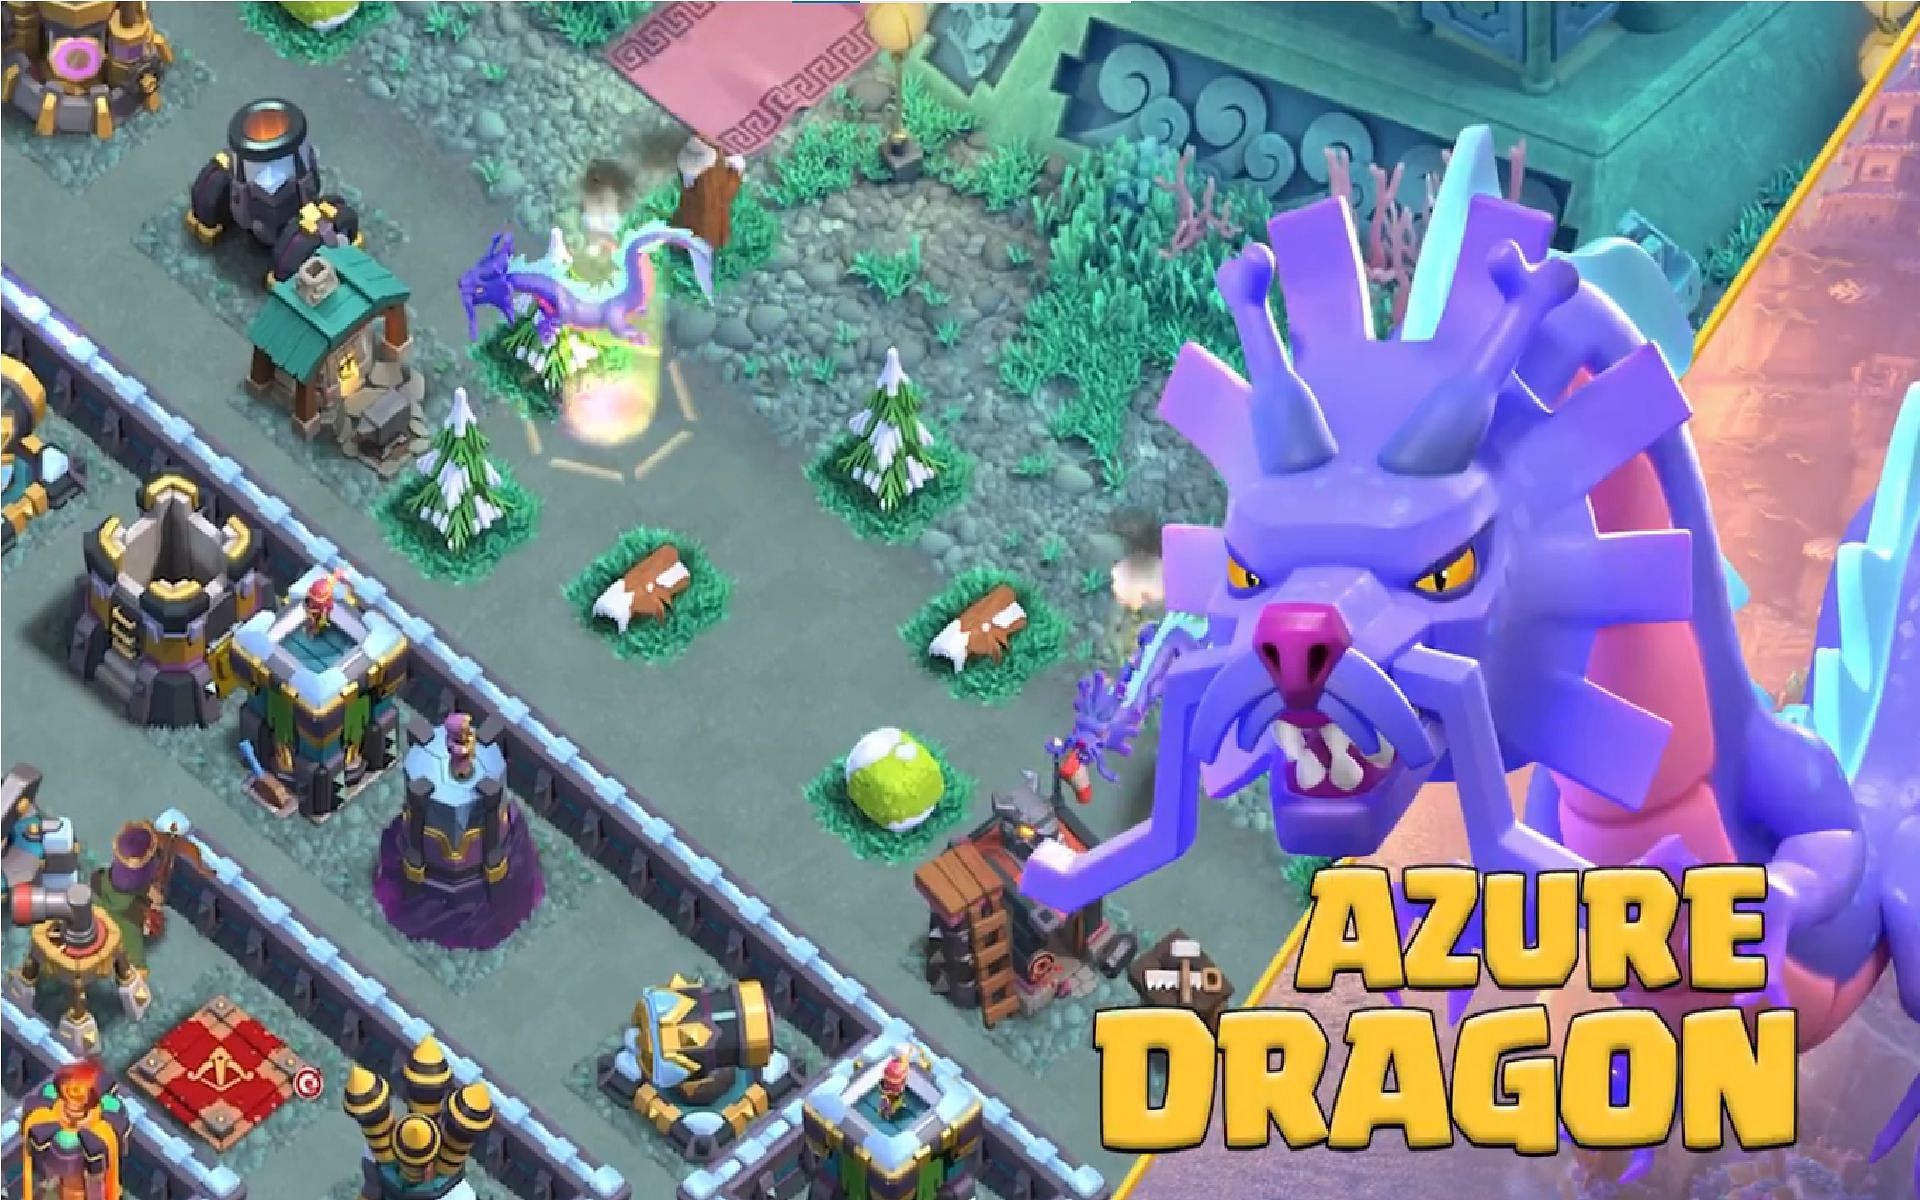 Azure Dragon, a new time-limited troop in Clash of Clans Lunar New Year update (Image via Supercell)